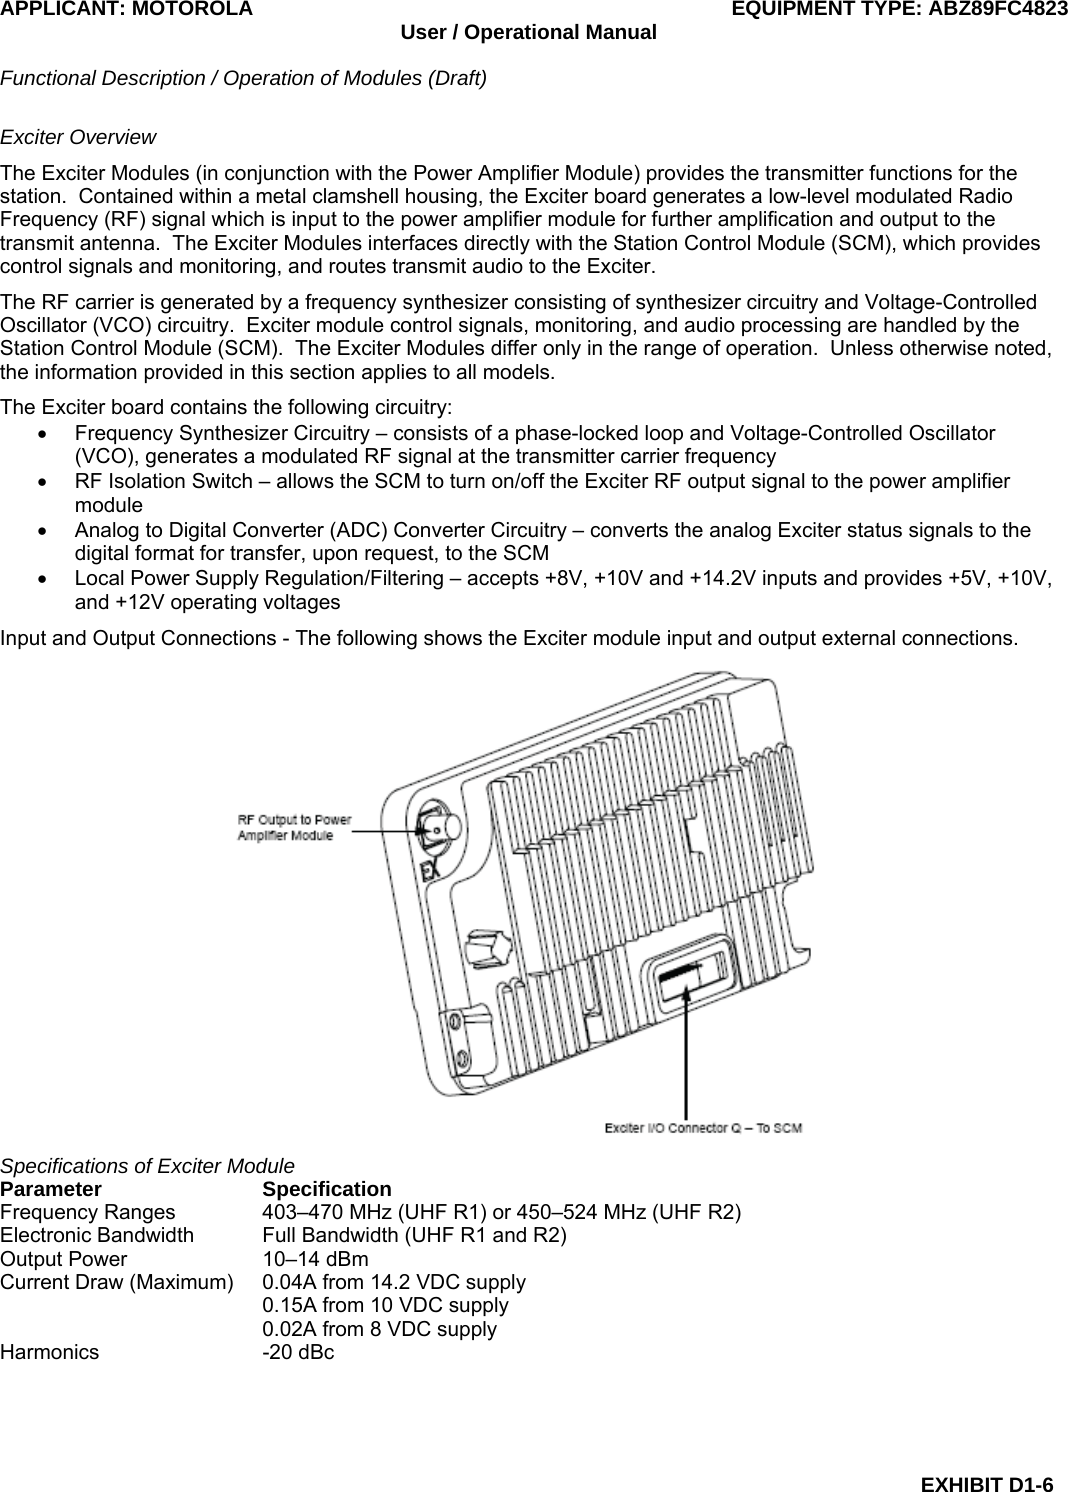 APPLICANT: MOTOROLA  EQUIPMENT TYPE: ABZ89FC4823 User / Operational Manual  Functional Description / Operation of Modules (Draft)  EXHIBIT D1-6 Exciter Overview The Exciter Modules (in conjunction with the Power Amplifier Module) provides the transmitter functions for the station.  Contained within a metal clamshell housing, the Exciter board generates a low-level modulated Radio Frequency (RF) signal which is input to the power amplifier module for further amplification and output to the transmit antenna.  The Exciter Modules interfaces directly with the Station Control Module (SCM), which provides control signals and monitoring, and routes transmit audio to the Exciter. The RF carrier is generated by a frequency synthesizer consisting of synthesizer circuitry and Voltage-Controlled Oscillator (VCO) circuitry.  Exciter module control signals, monitoring, and audio processing are handled by the Station Control Module (SCM).  The Exciter Modules differ only in the range of operation.  Unless otherwise noted, the information provided in this section applies to all models. The Exciter board contains the following circuitry: •  Frequency Synthesizer Circuitry – consists of a phase-locked loop and Voltage-Controlled Oscillator (VCO), generates a modulated RF signal at the transmitter carrier frequency •  RF Isolation Switch – allows the SCM to turn on/off the Exciter RF output signal to the power amplifier module •  Analog to Digital Converter (ADC) Converter Circuitry – converts the analog Exciter status signals to the digital format for transfer, upon request, to the SCM •  Local Power Supply Regulation/Filtering – accepts +8V, +10V and +14.2V inputs and provides +5V, +10V, and +12V operating voltages Input and Output Connections - The following shows the Exciter module input and output external connections.  Specifications of Exciter Module Parameter Specification Frequency Ranges  403–470 MHz (UHF R1) or 450–524 MHz (UHF R2) Electronic Bandwidth  Full Bandwidth (UHF R1 and R2) Output Power  10–14 dBm Current Draw (Maximum)  0.04A from 14.2 VDC supply   0.15A from 10 VDC supply   0.02A from 8 VDC supply Harmonics -20 dBc  